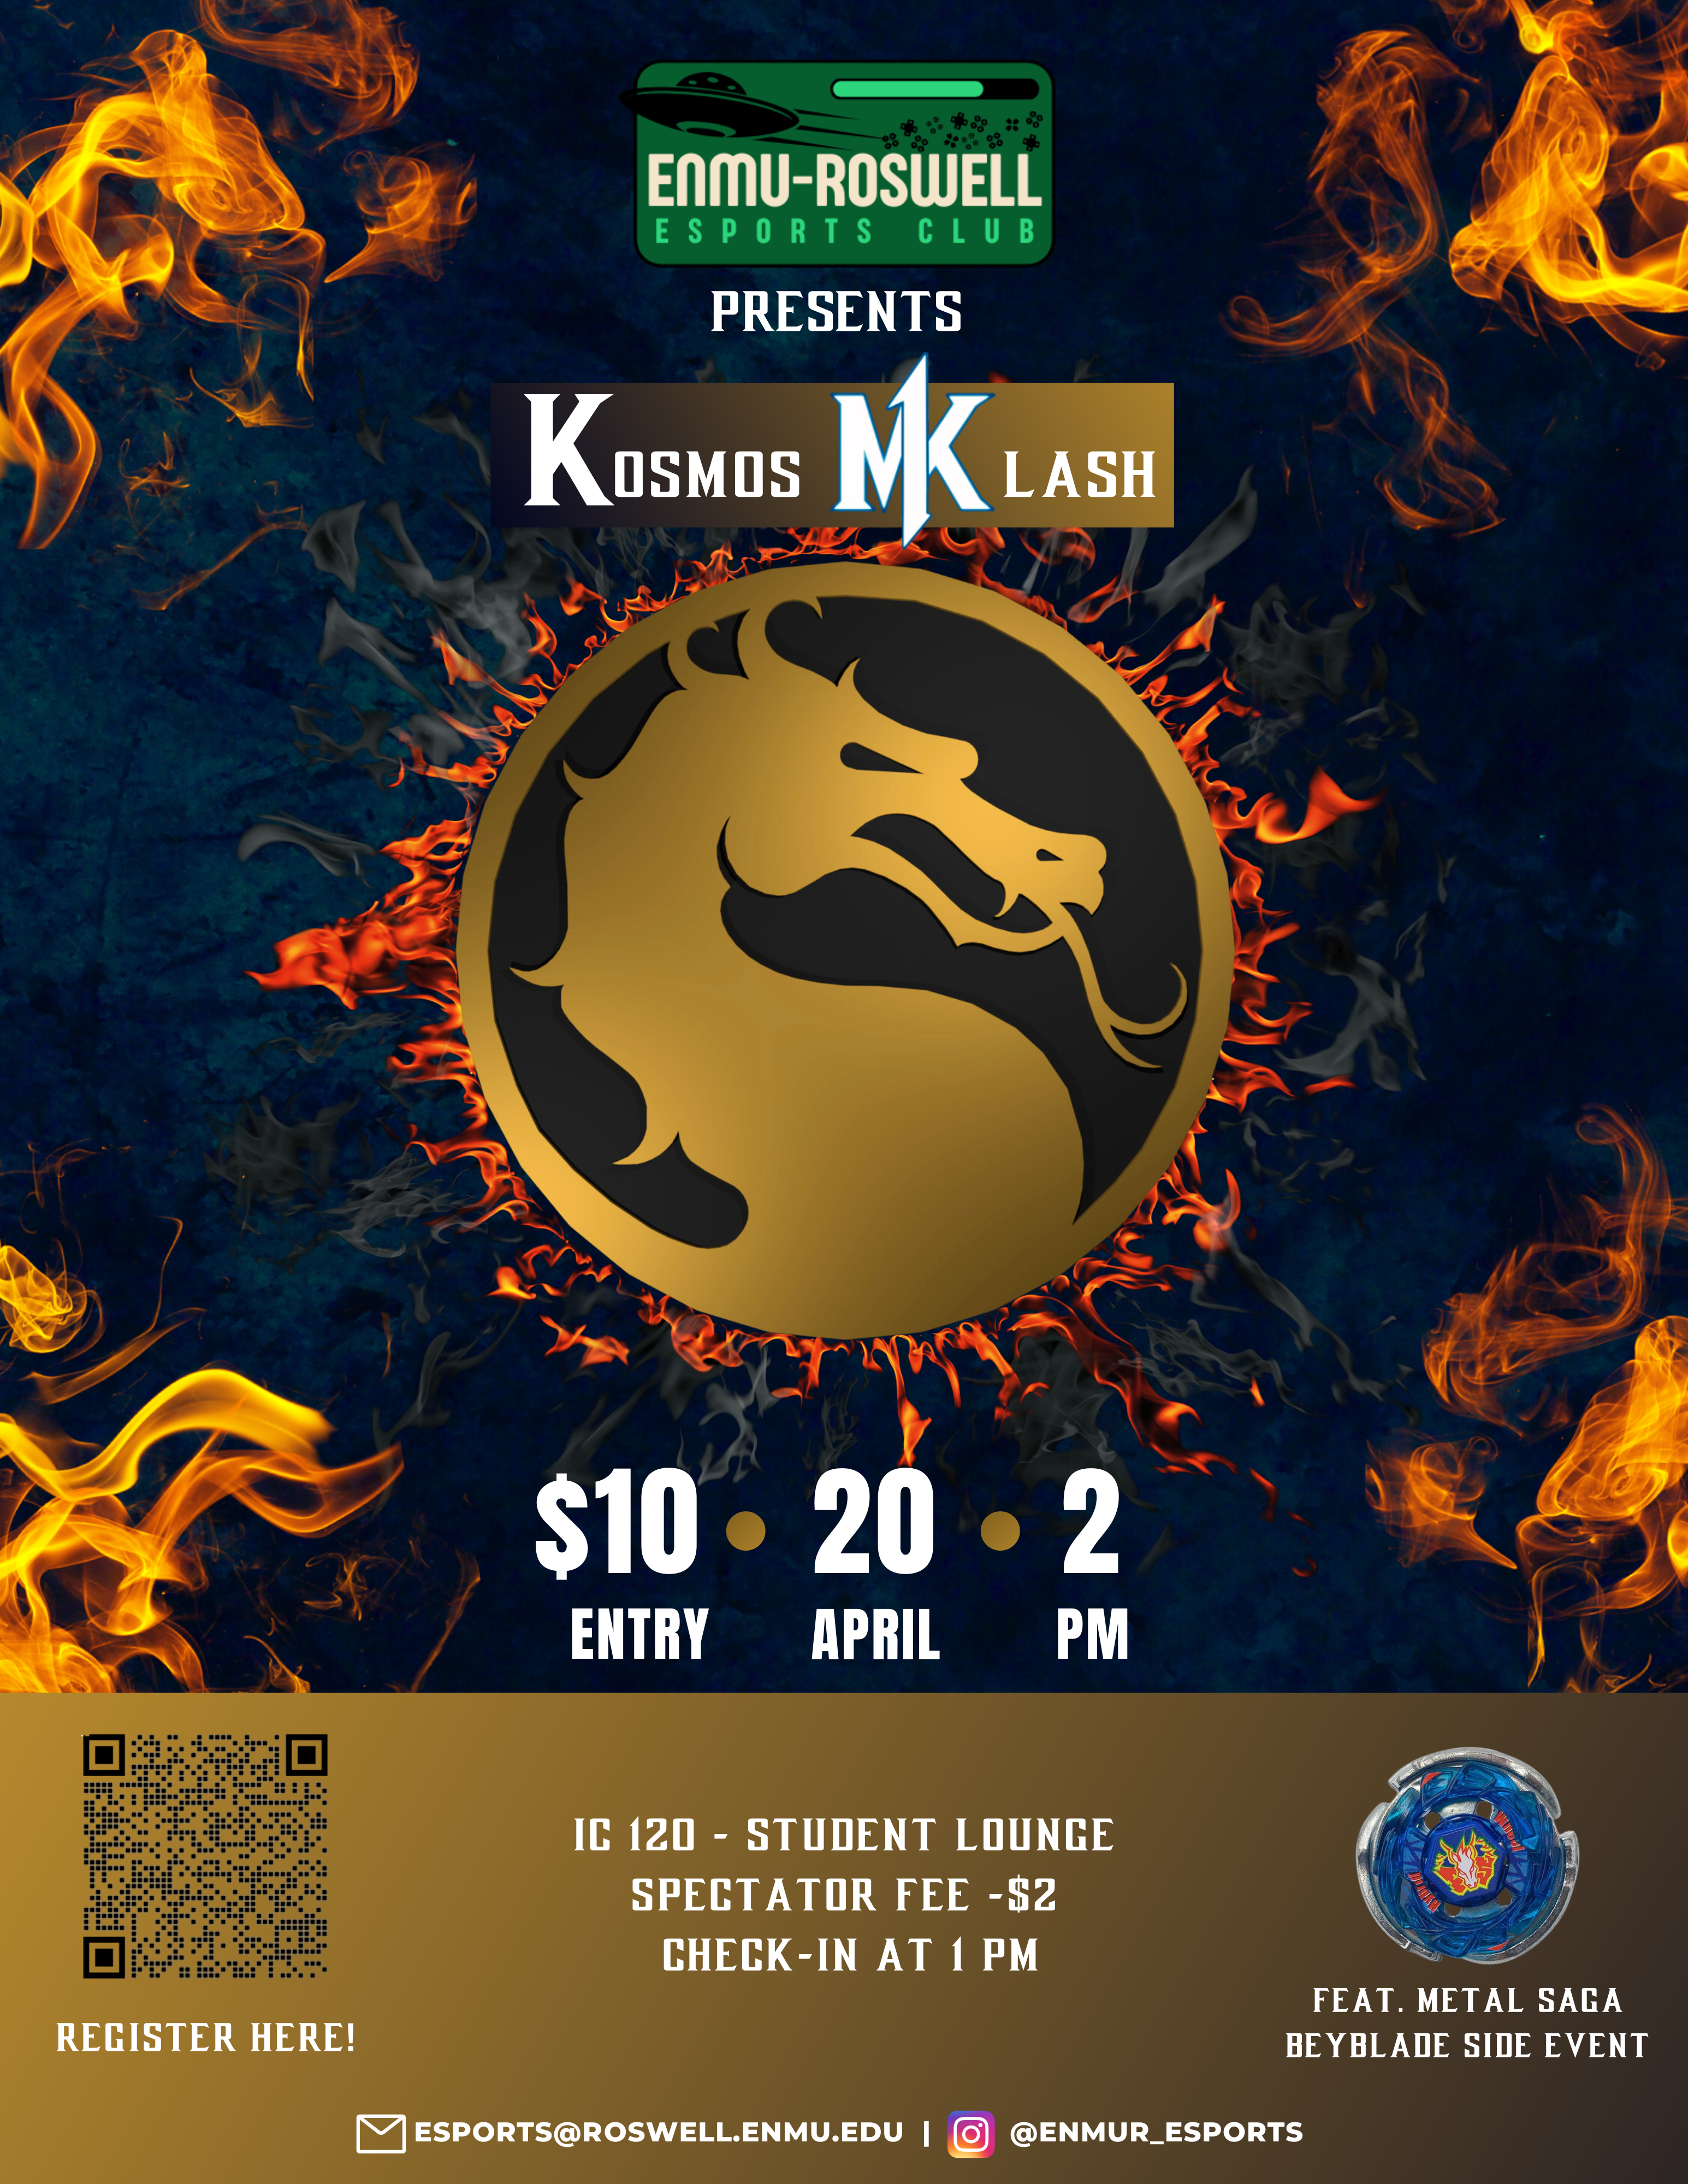 On April 20th, 2024, the ENMU-Roswell E-Sports Club will host a Mortal Kombat Tournament on campus in the Student Lounge. The entry fee is $10 USD and the tournament will begin at 2 PM.